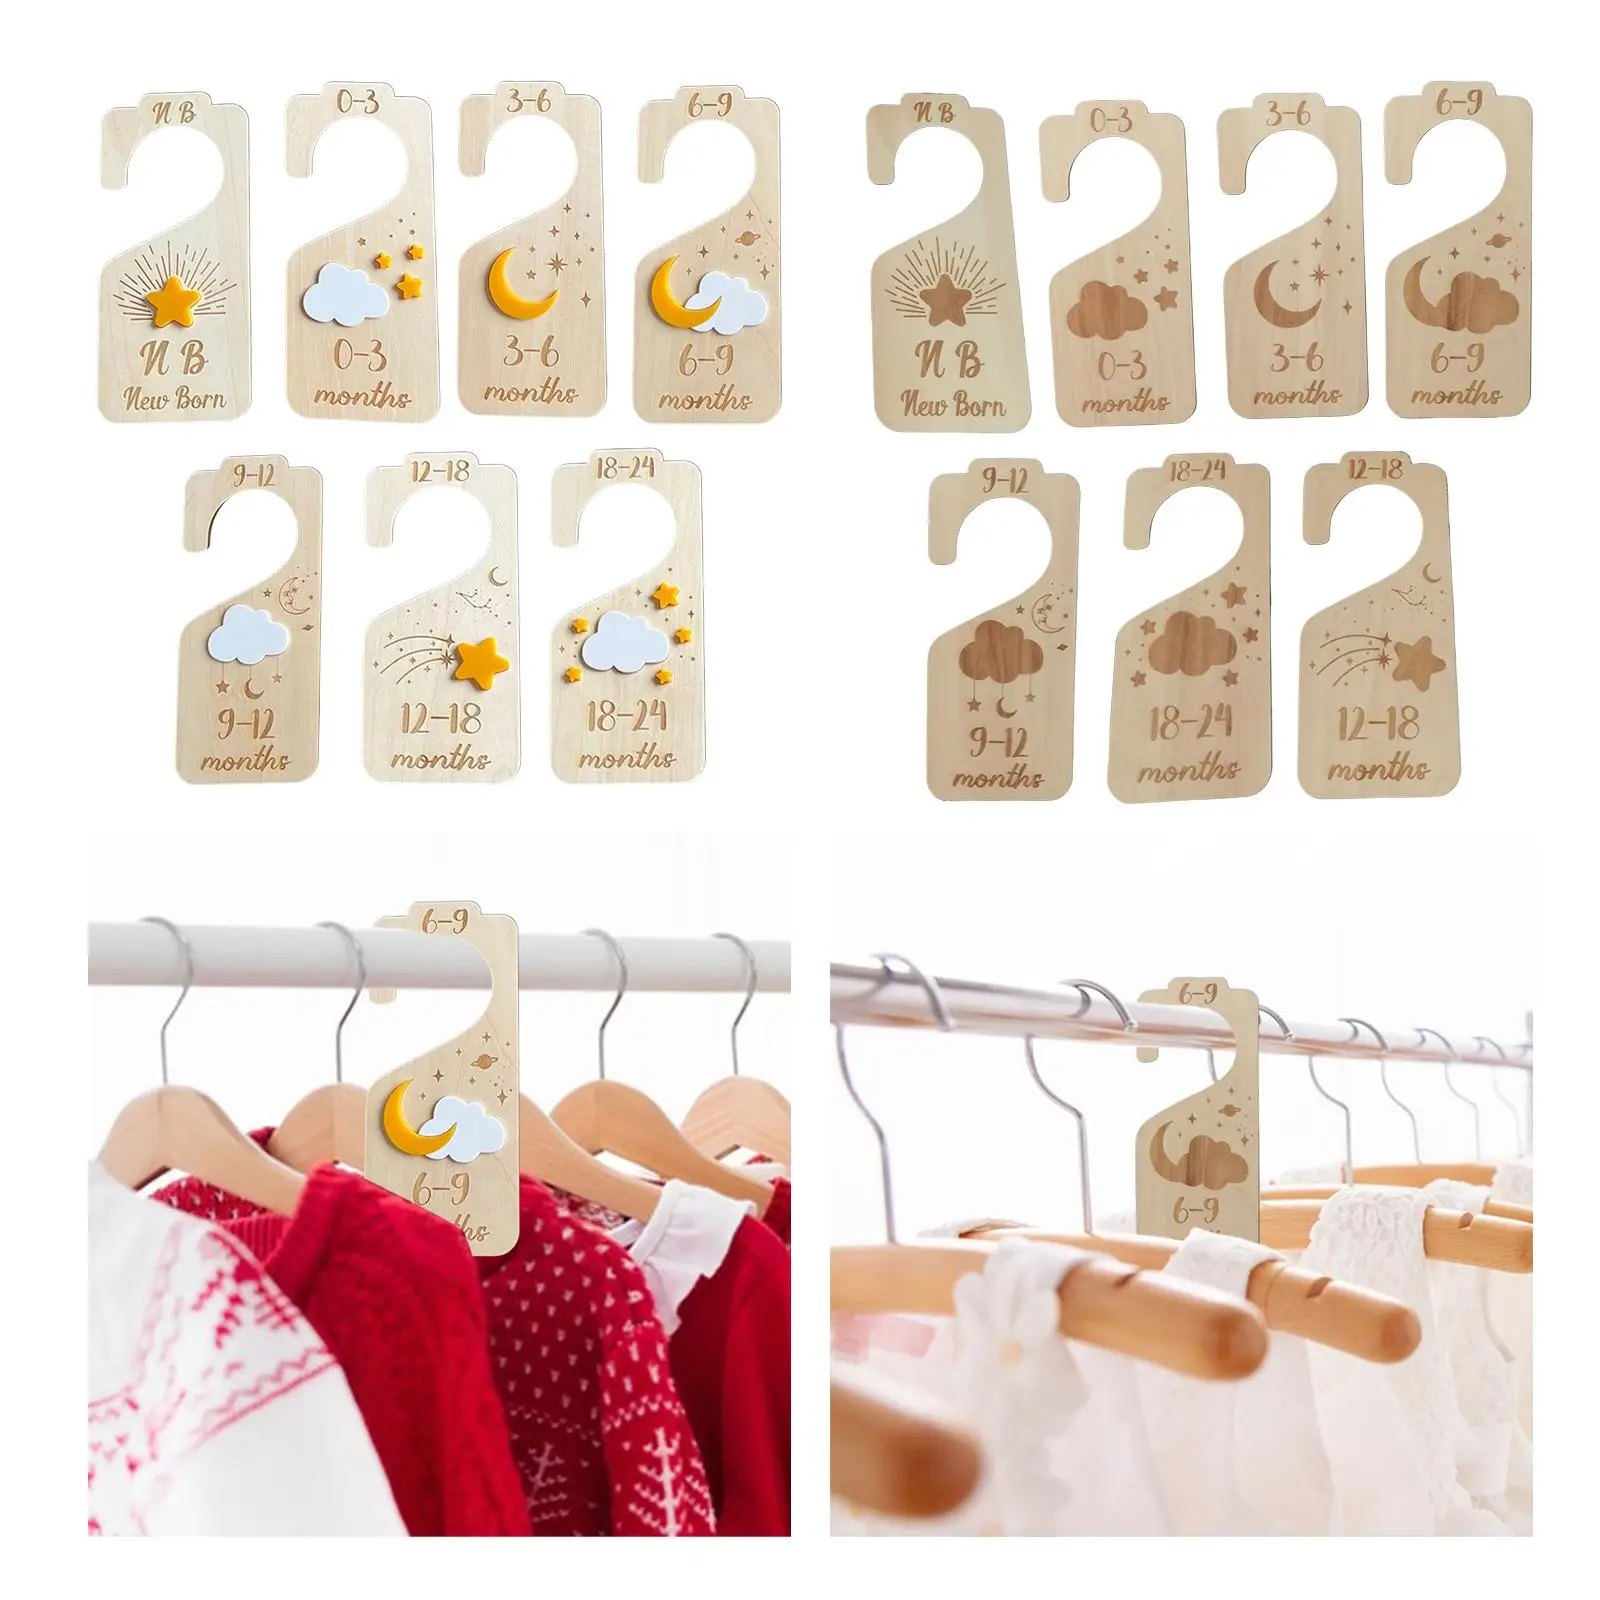 7 Pieces Baby Clothes Organizers Durable Wooden from Newborn to 24 Months Hanger Dividers for Home Bedroom Living Room Mom Gifts